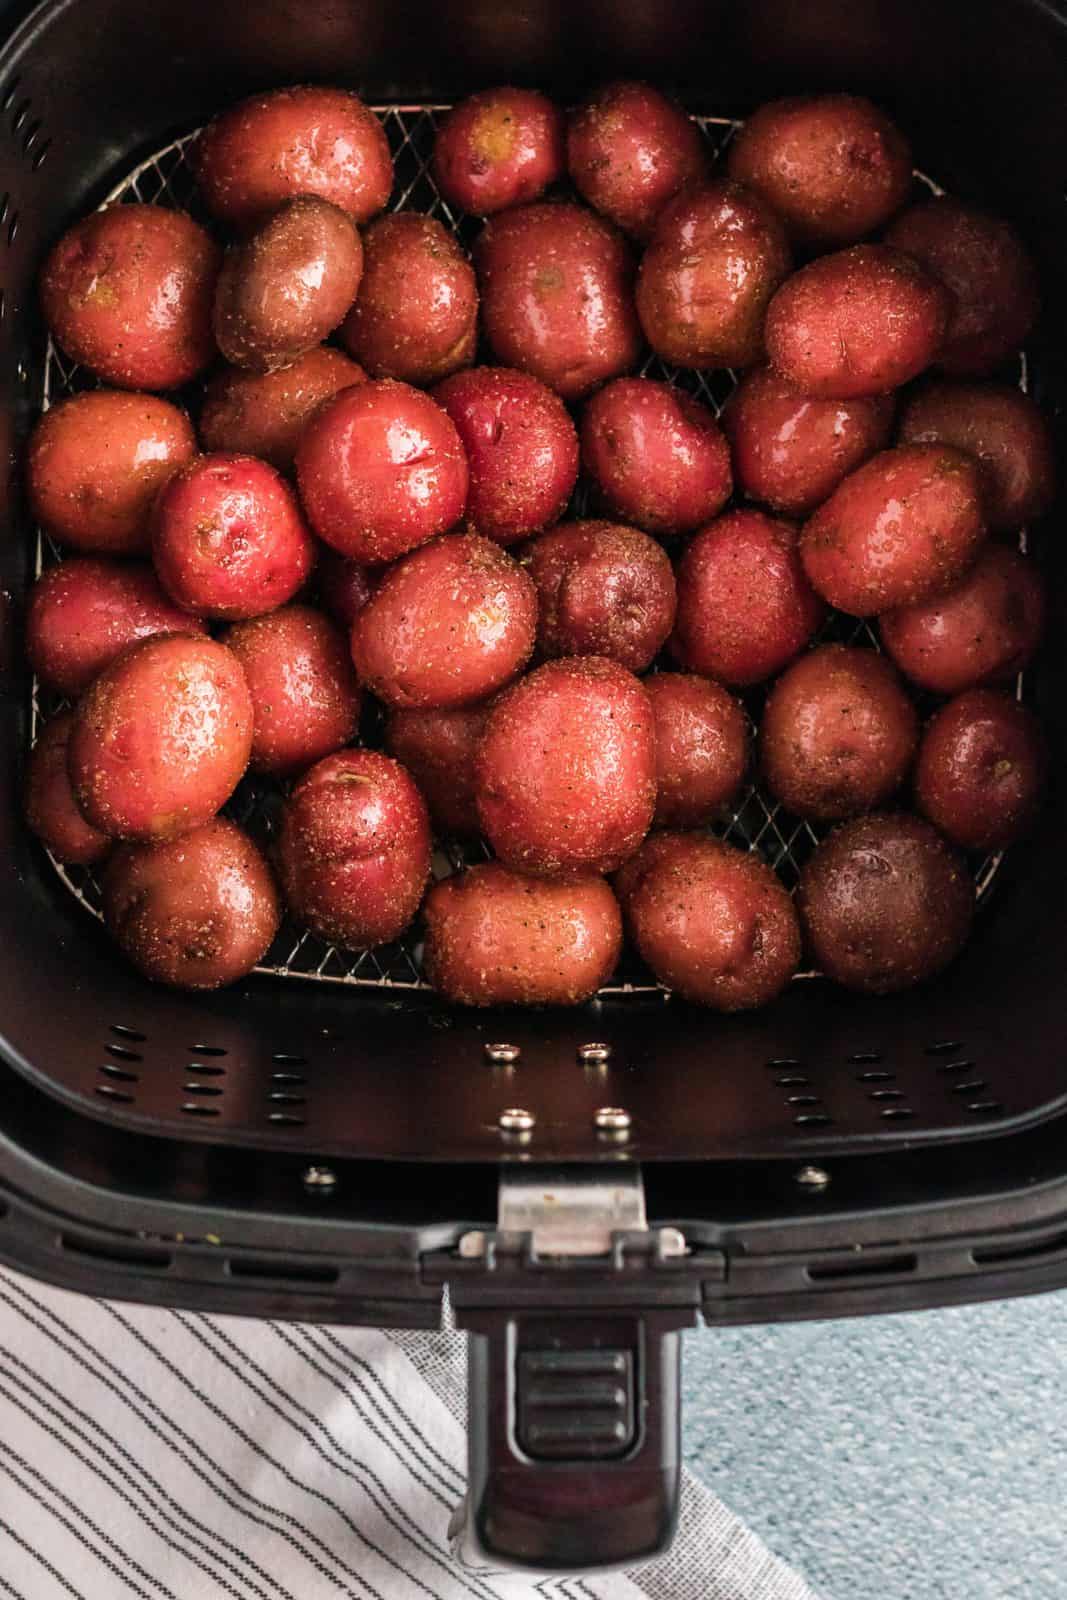 Baby potatoes placed in air fryer basket.